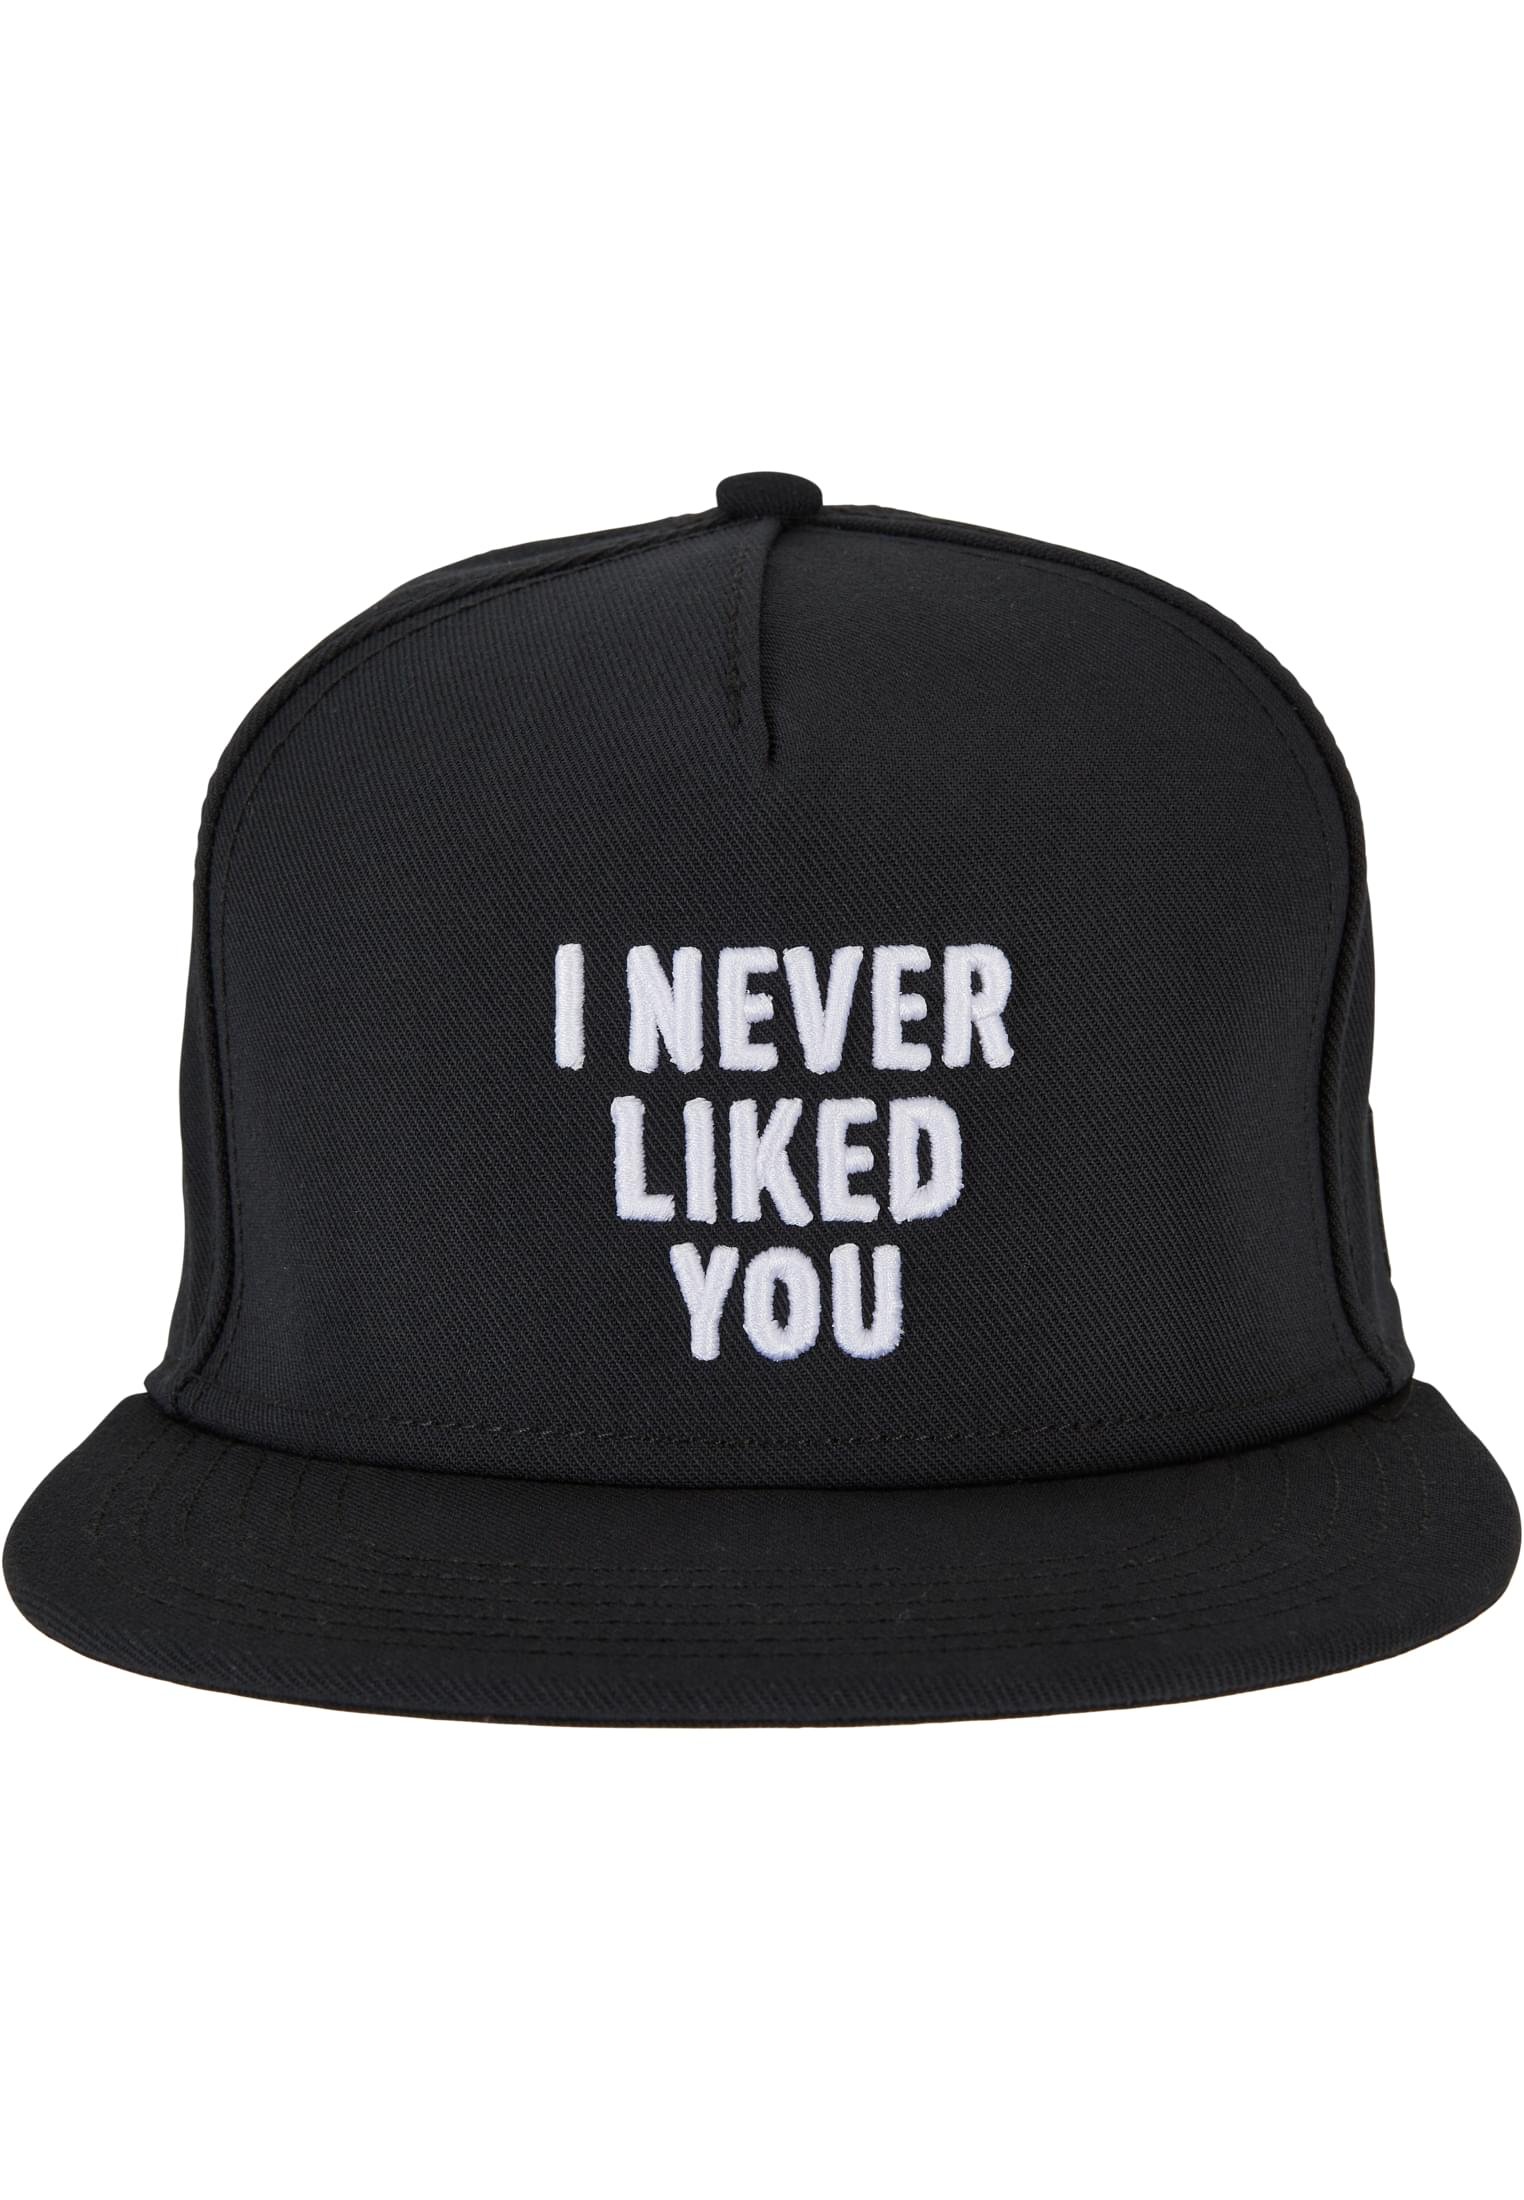 Never Liked You P Cap black one size